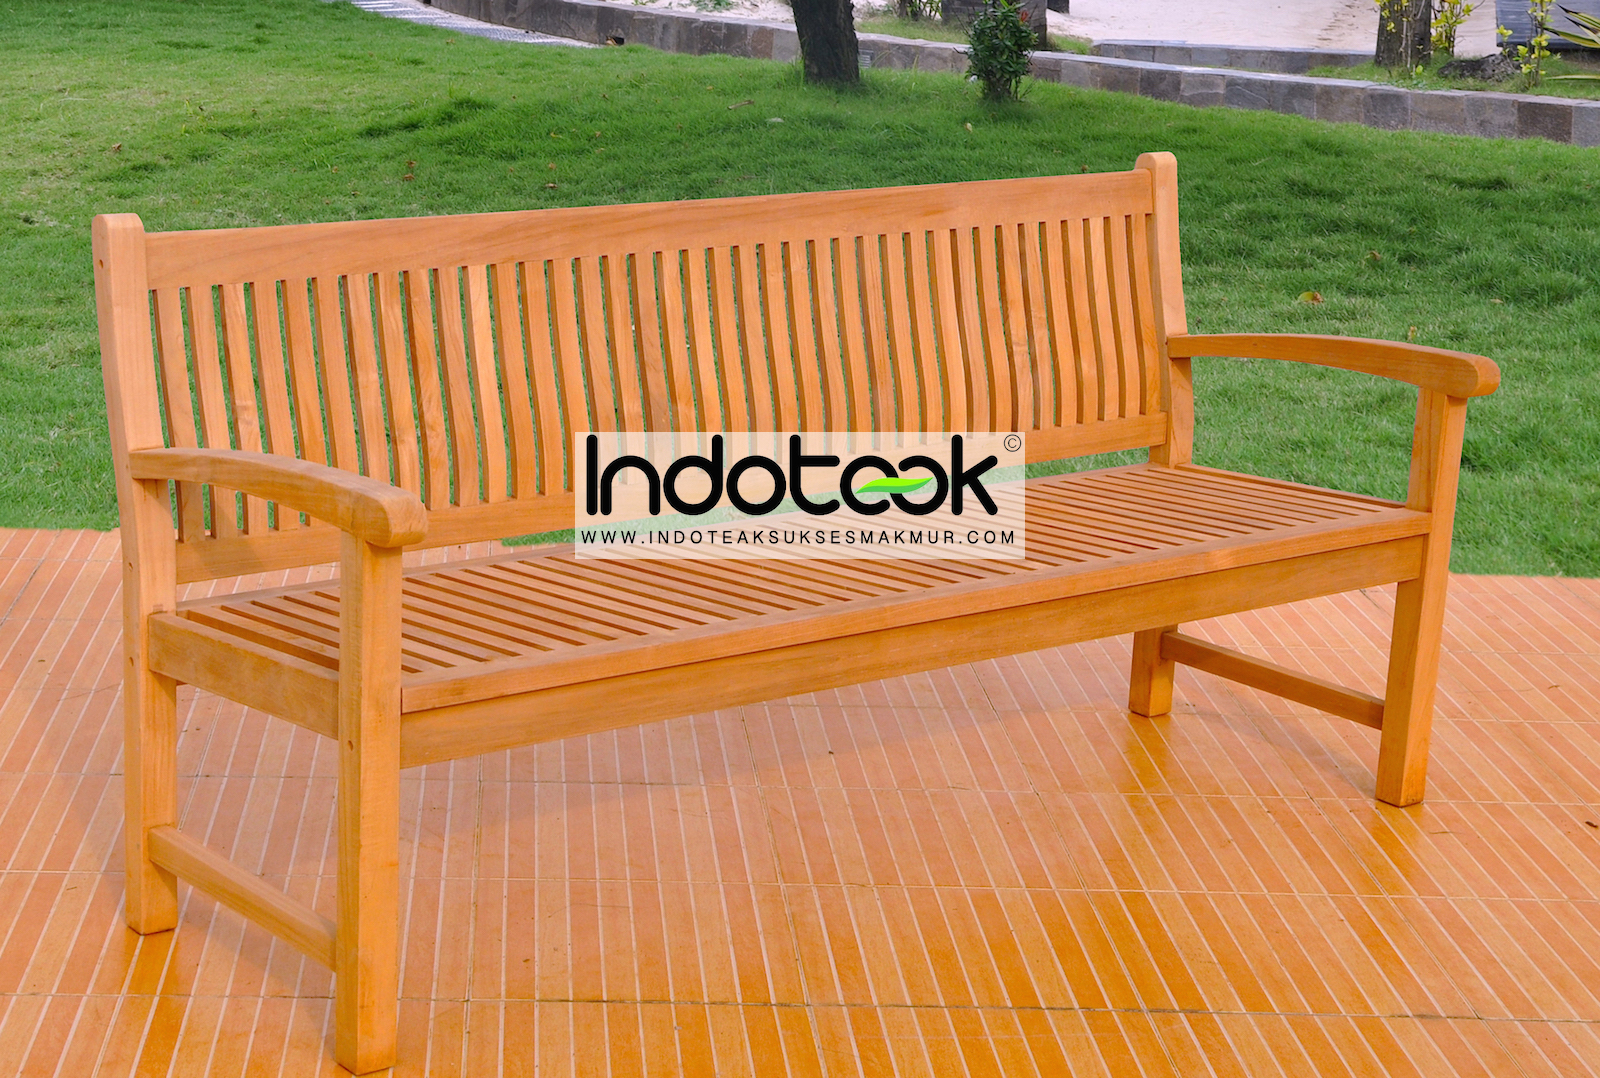 Outdoor bench furniture supplier from Jepara Indonesia